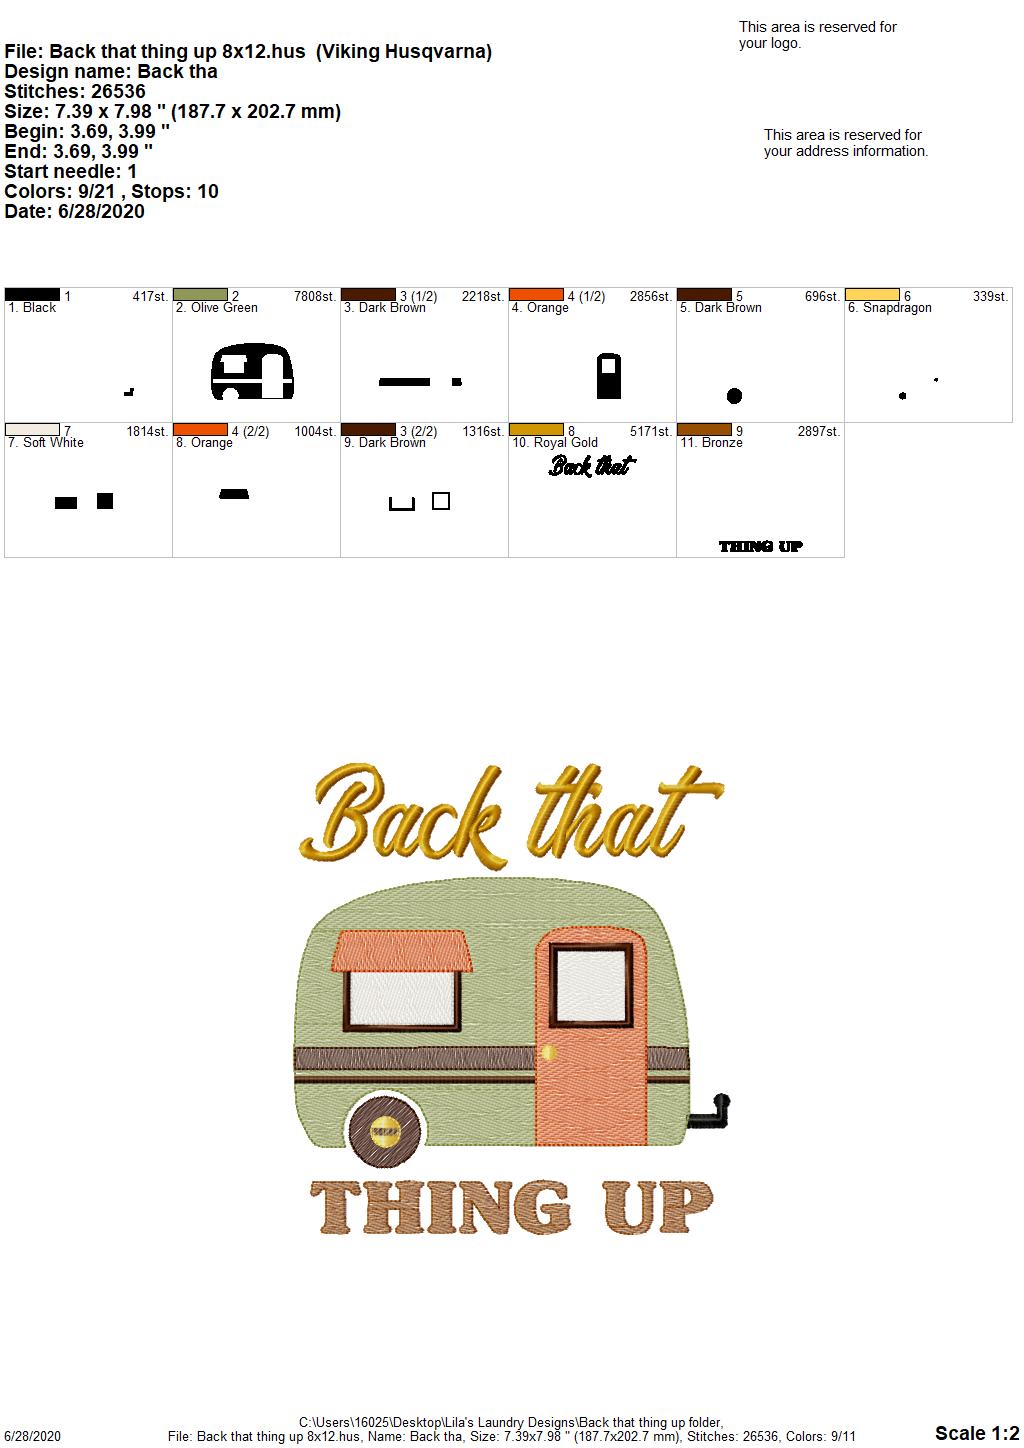 Back That Thing Up - 3 Sizes - Digital Embroidery Design